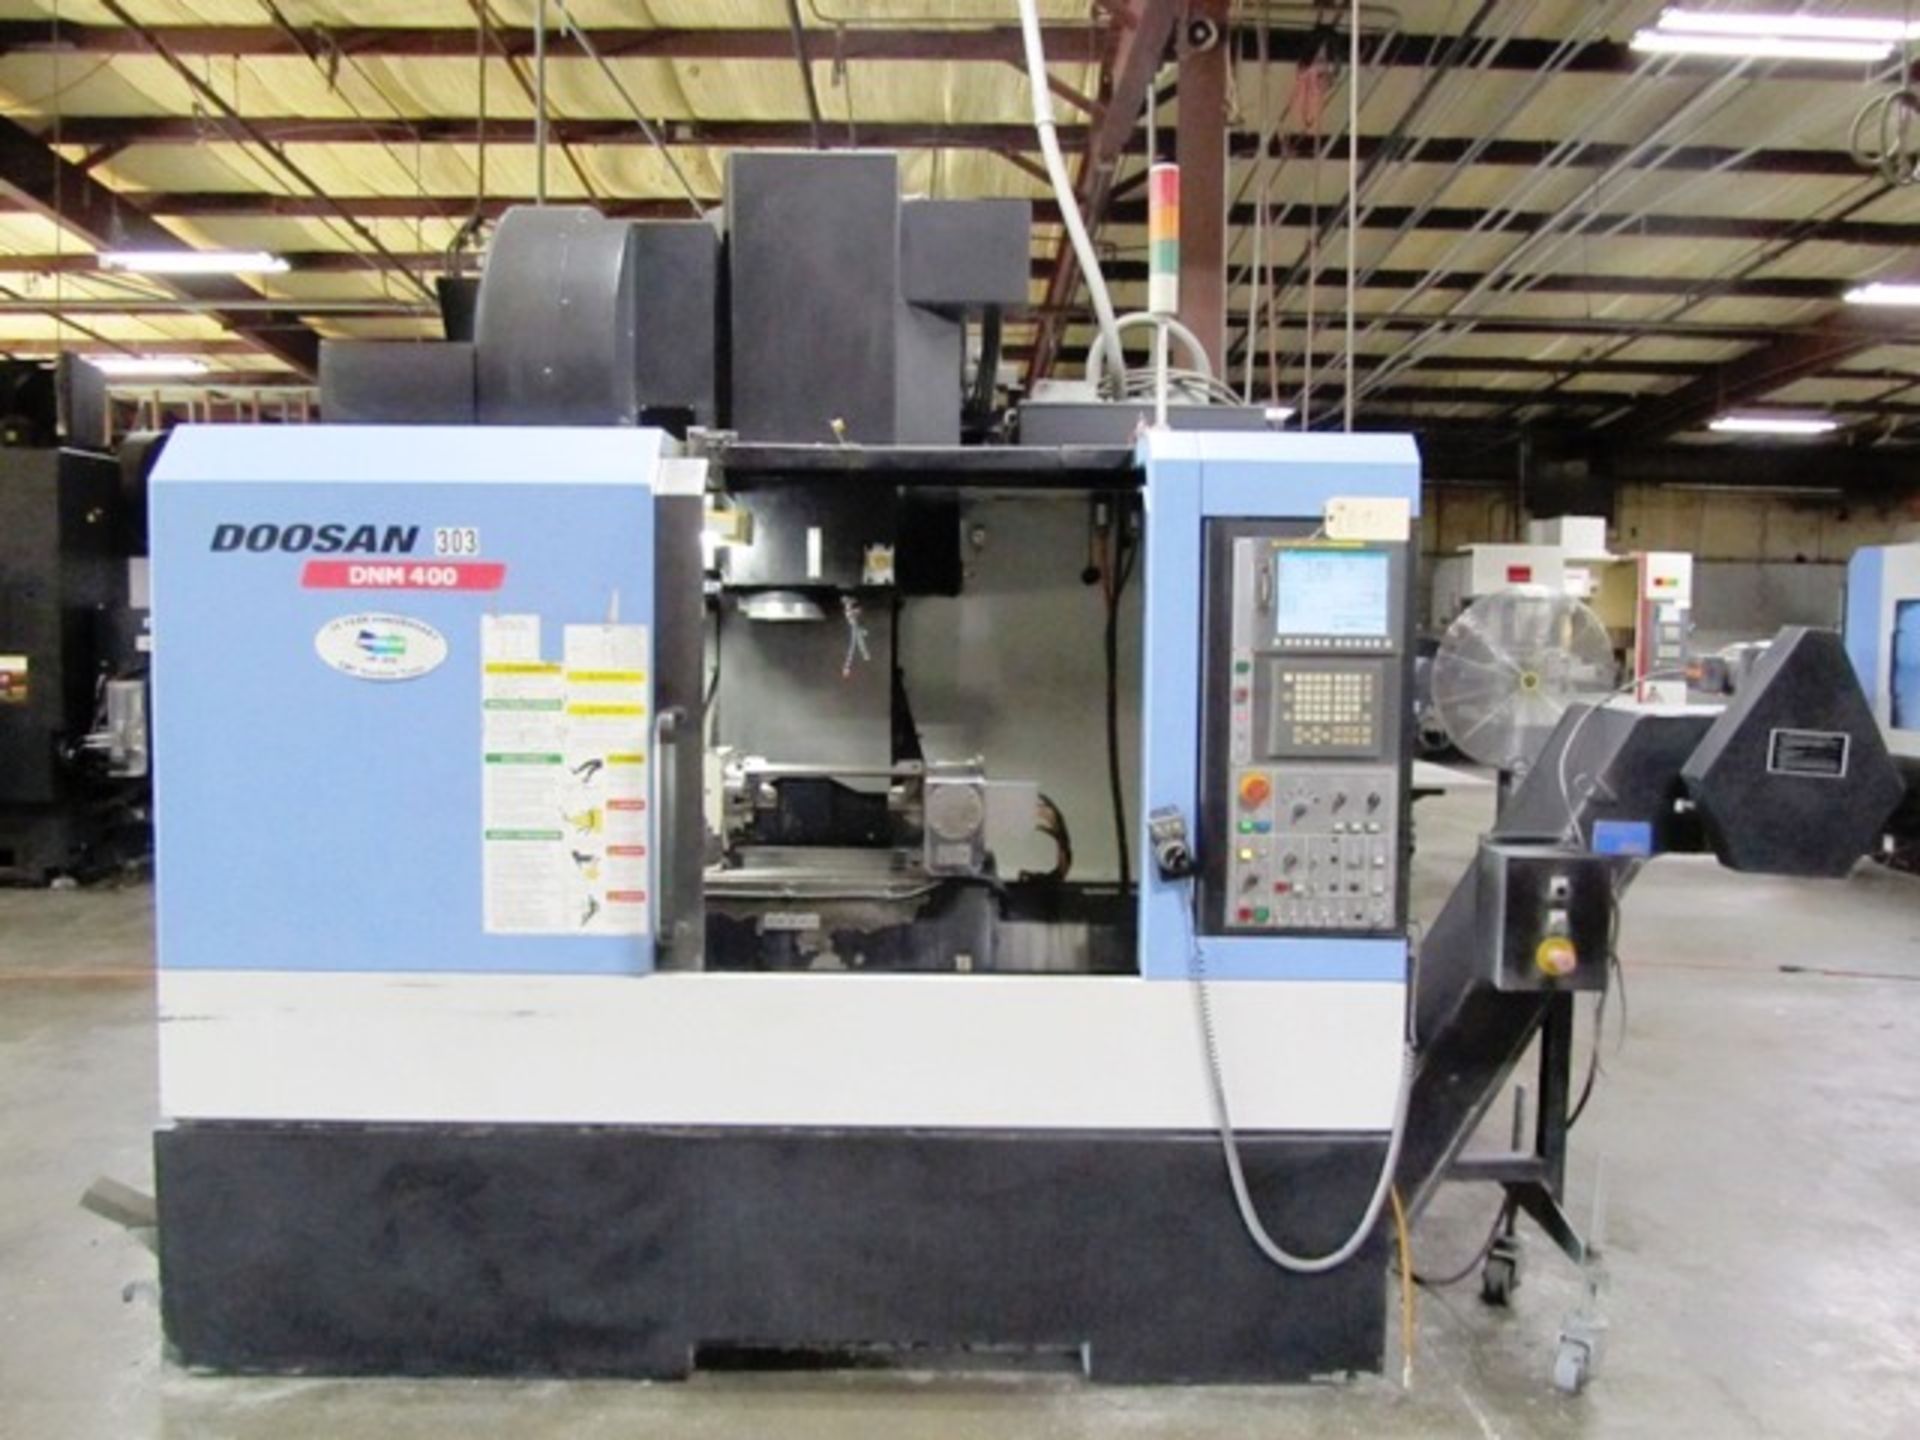 Doosan DNM 400 4-Axis CNC Vertical Machining Center with 6'' & 8'' Tsudakoma 4th Axis Rotary Tables,